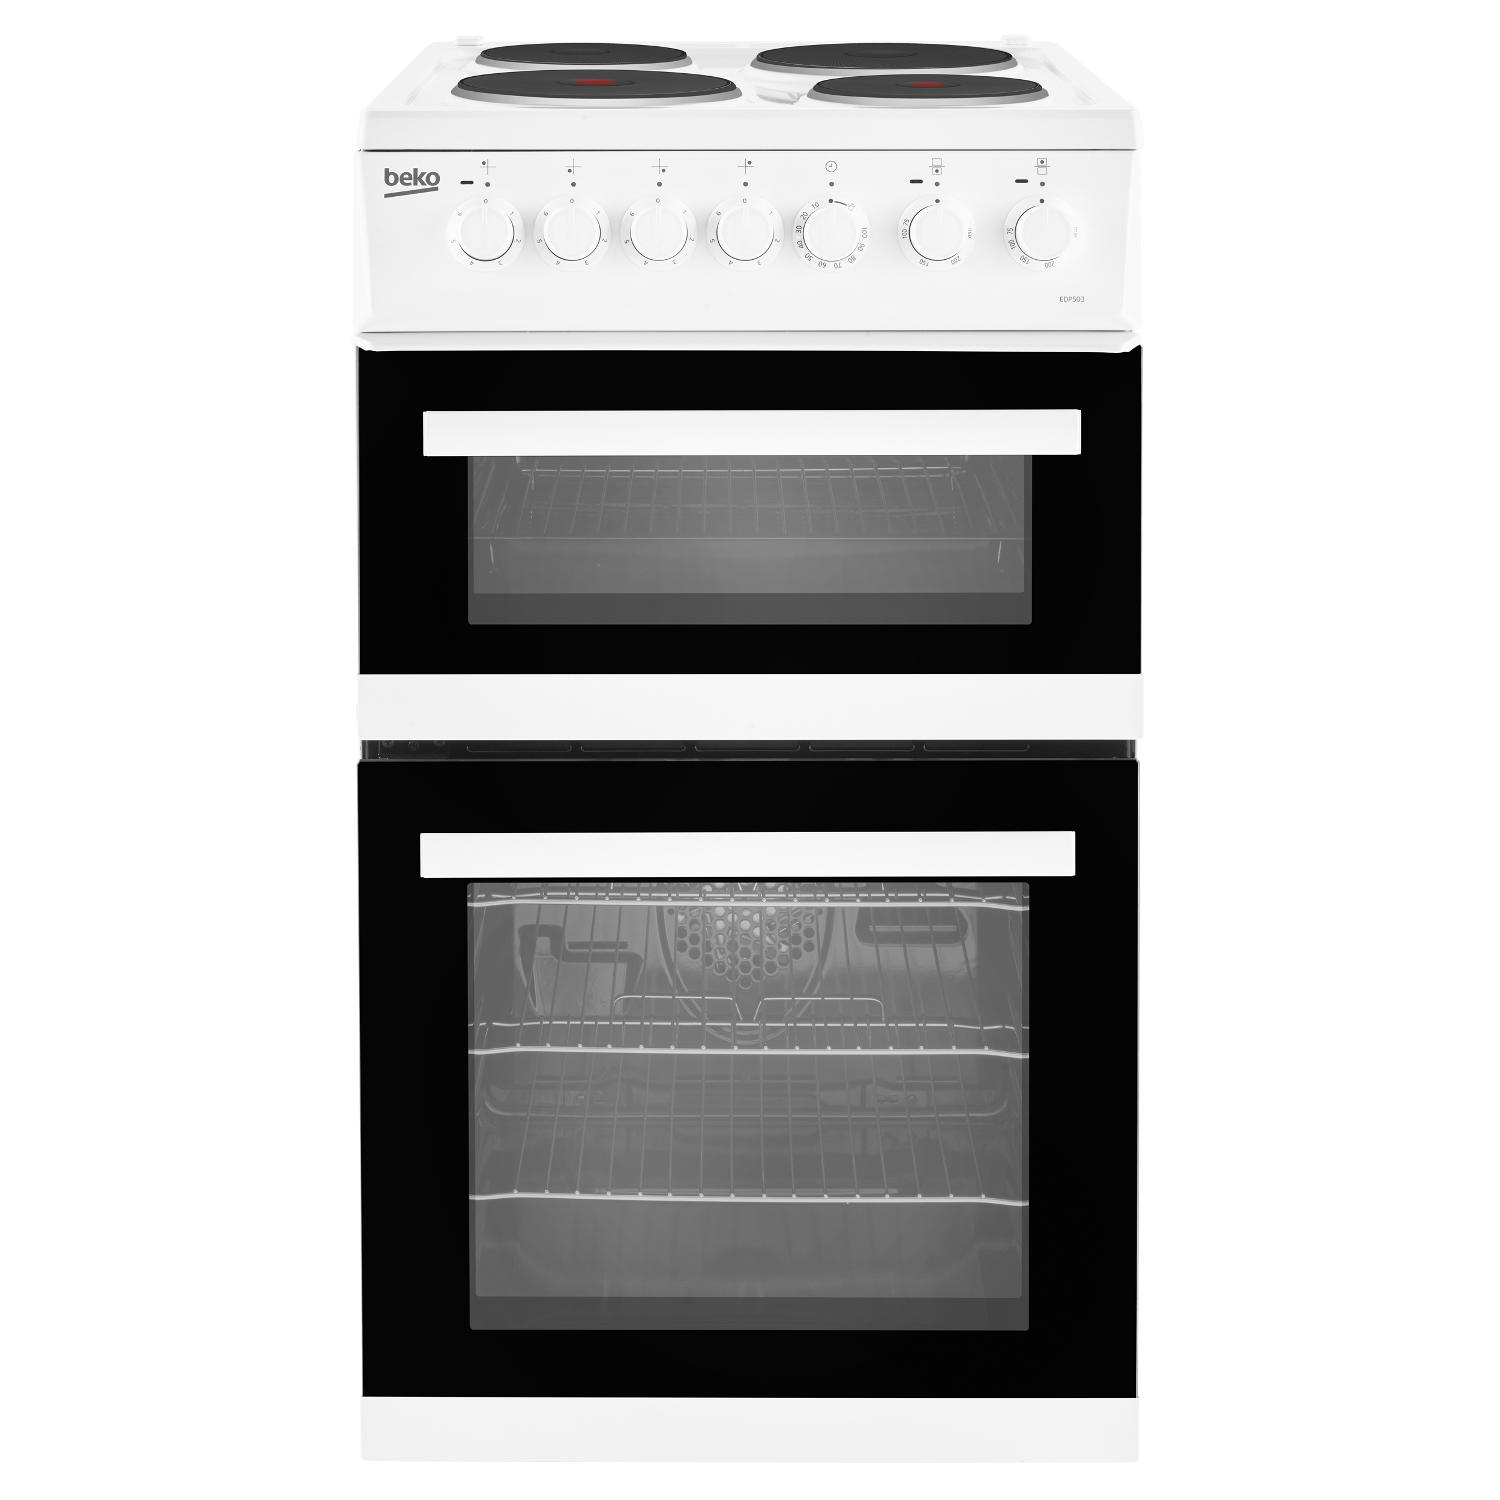 Beko EDP503W 50cm Electric Double Oven with Grill Cooker - White - 3